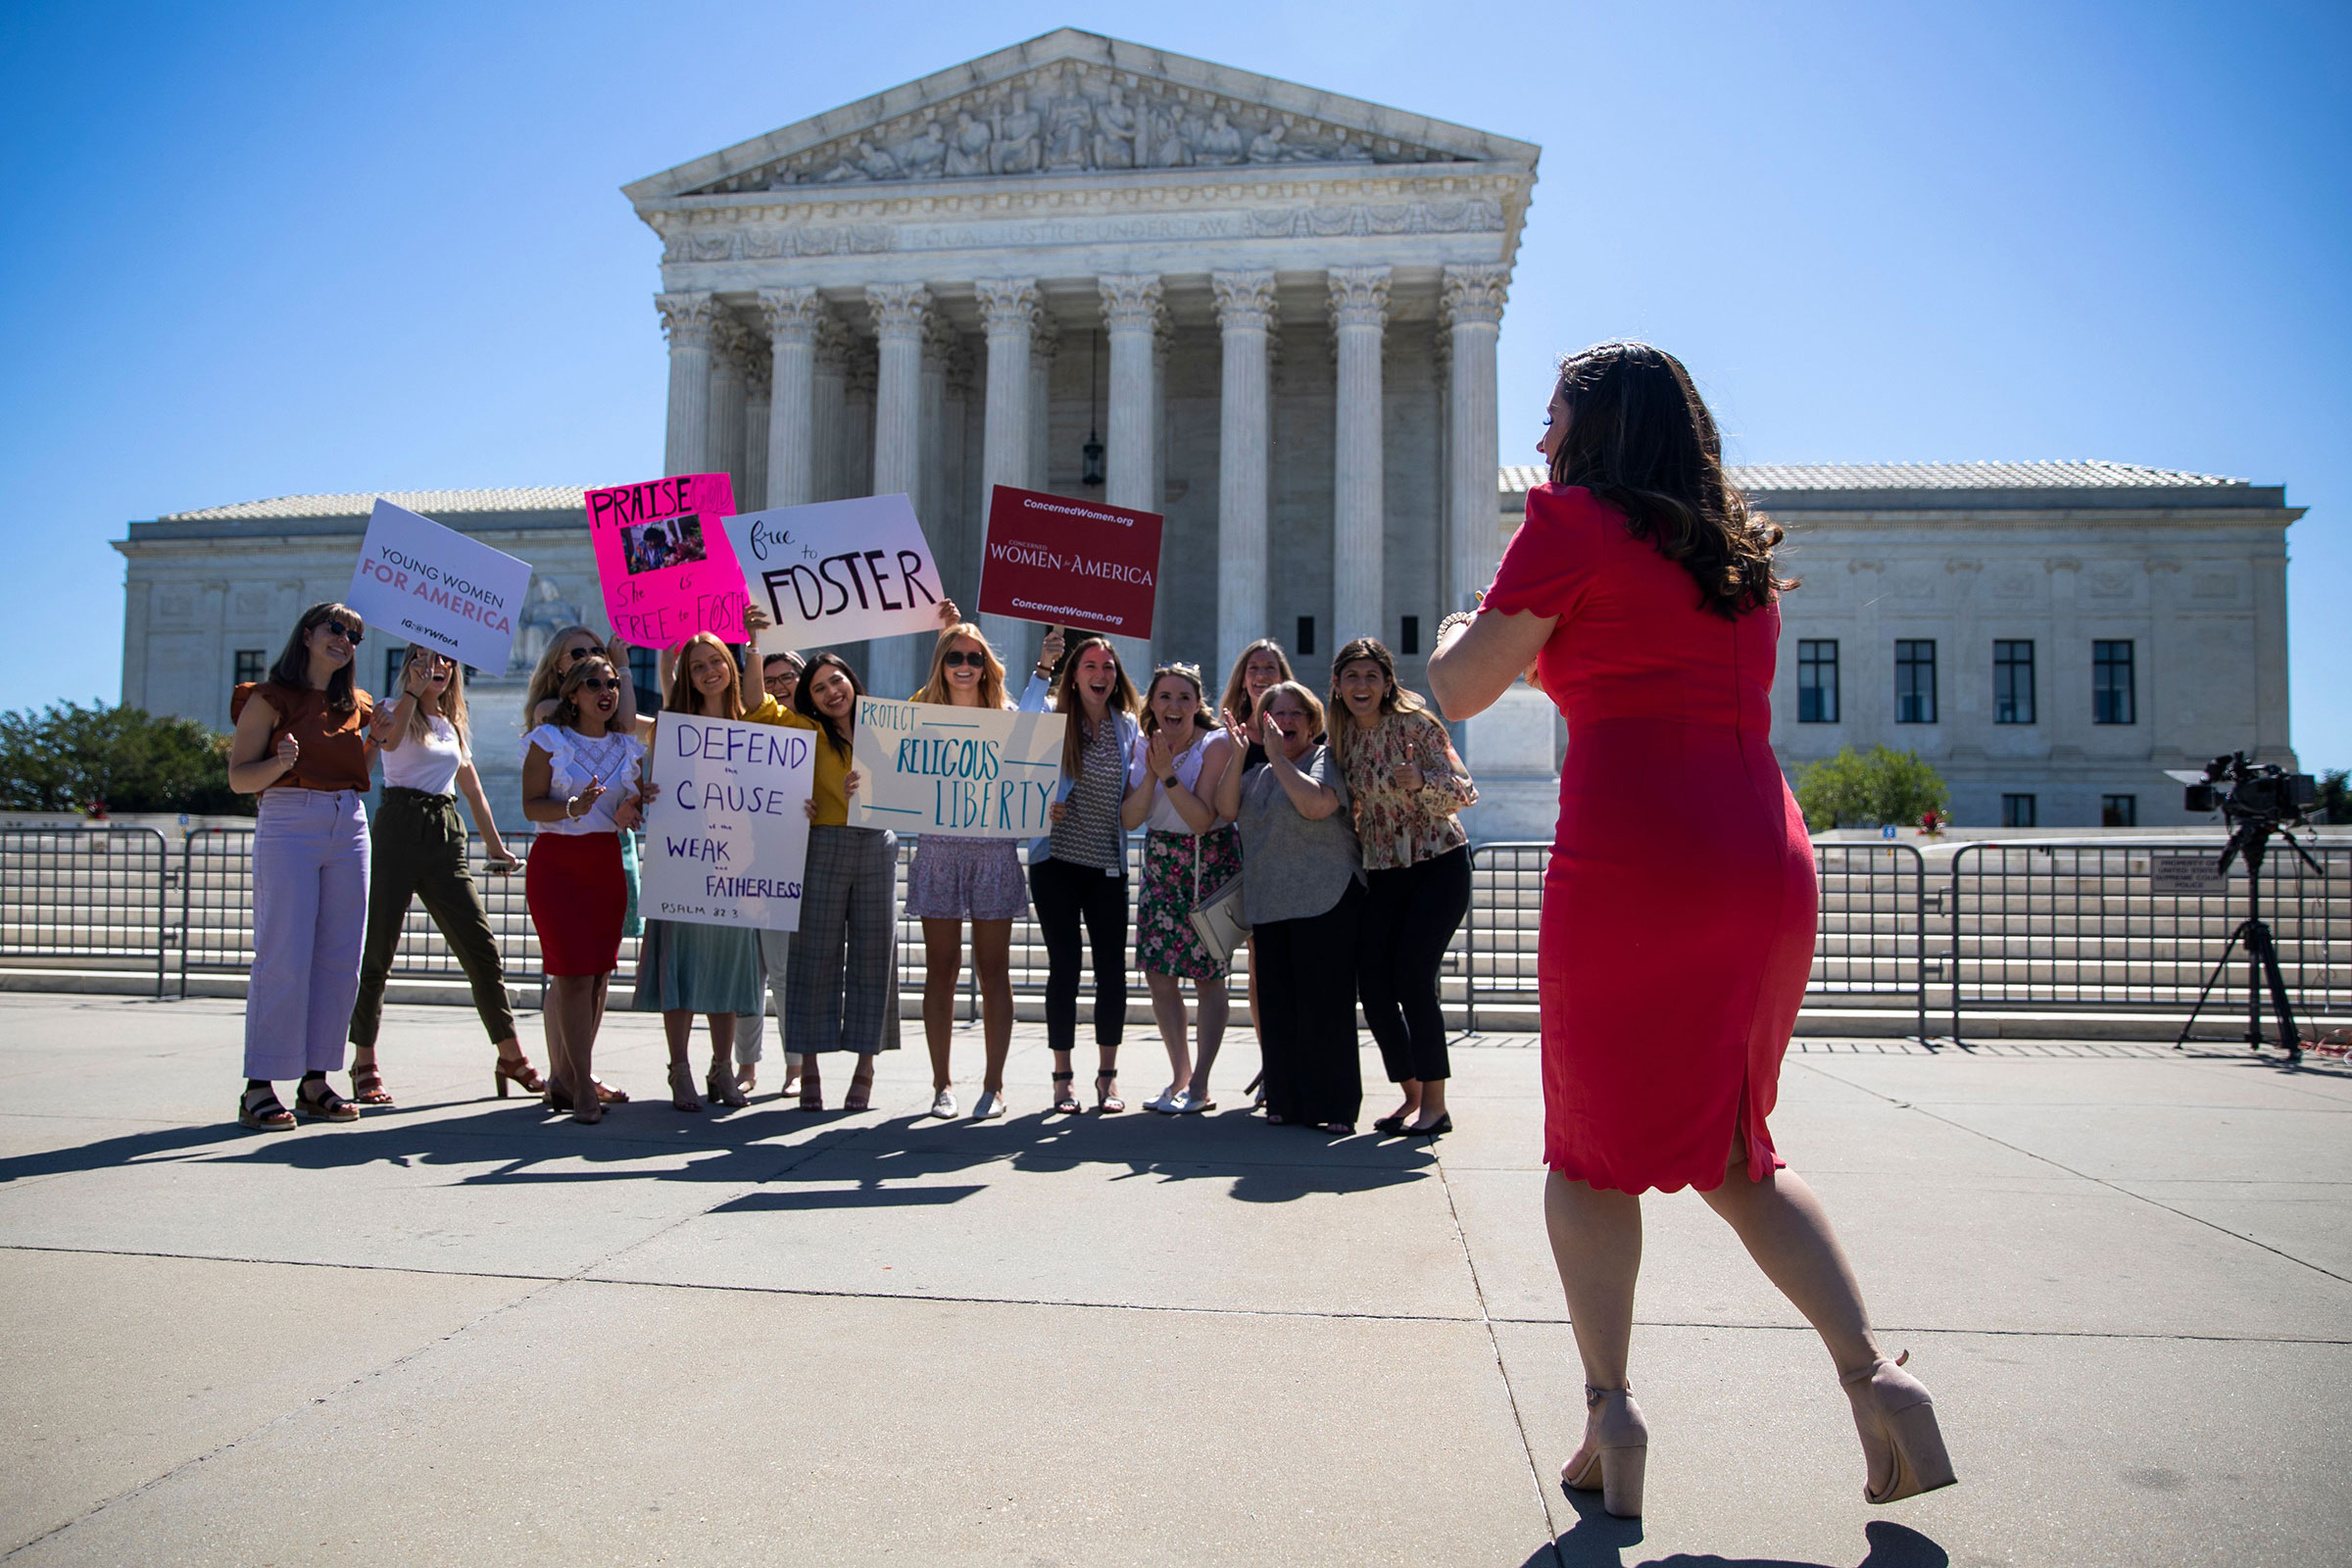 People stand in front of the Supreme Court in Washington, DC on June 17, 2021. (Shawn Thew — EPA / Shutterstock)